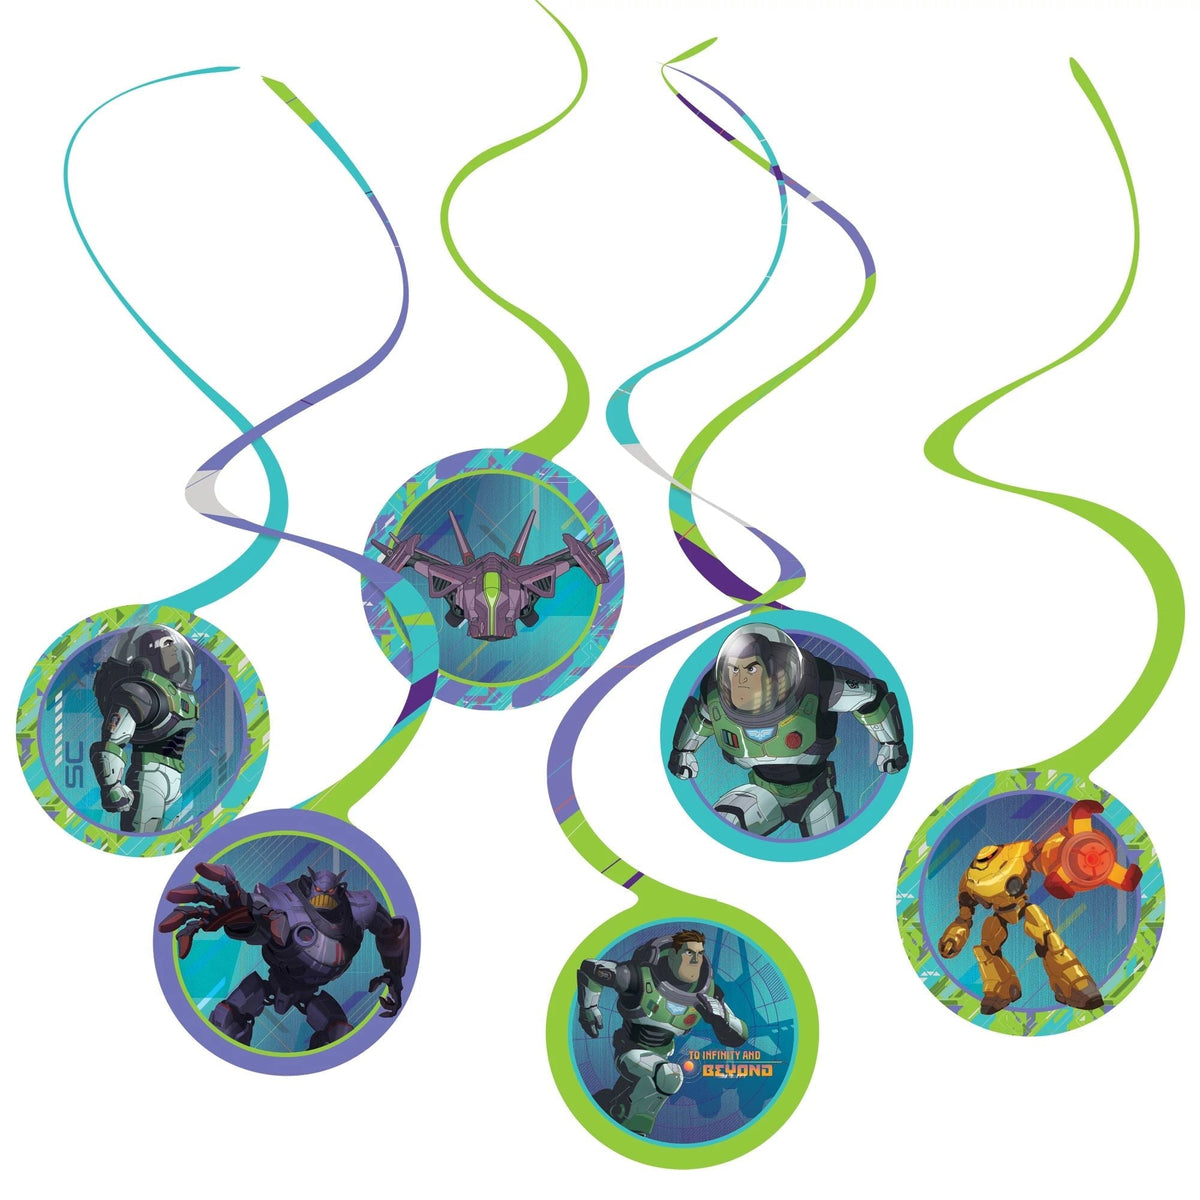 AMSCAN CA Kids Birthday Buzz Lightyear Birthday Spiral Decoration Kit with Cutouts, 12 Count 192937343524